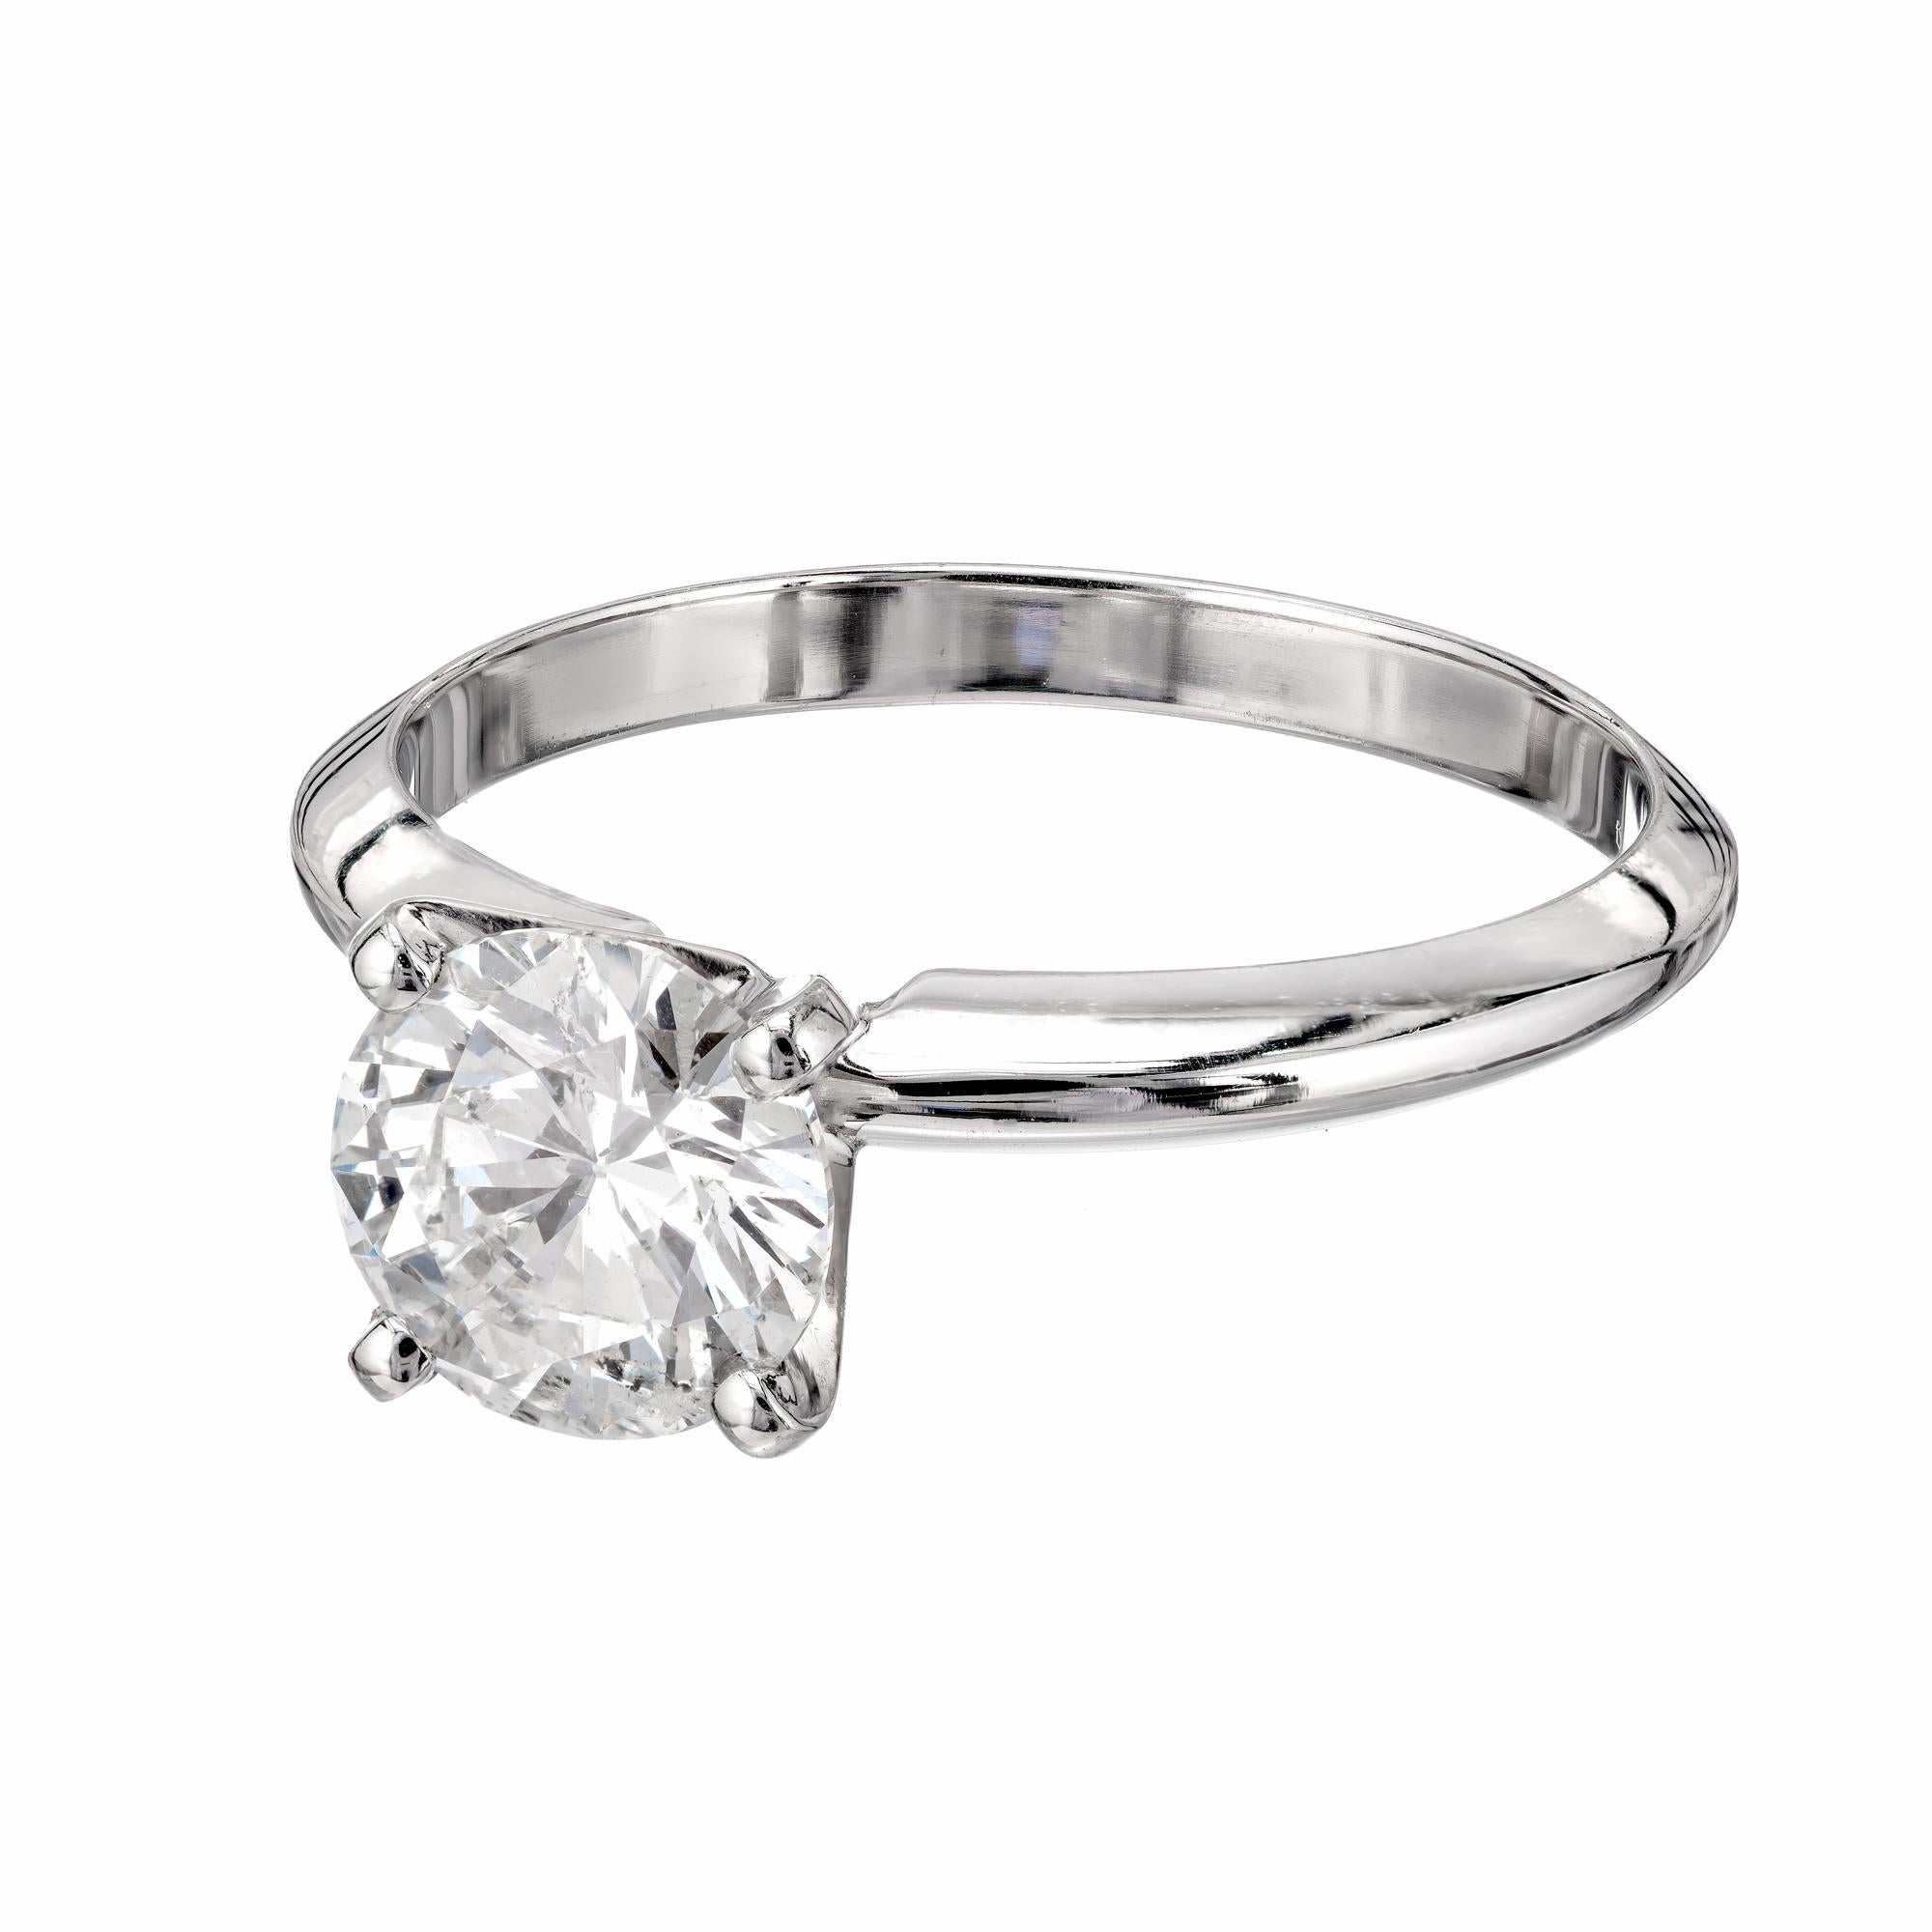 Diamond solitaire engagement ring. Bright sparkly transitional cut diamond. GIA certified stone set in a platinum setting from the Peter Suchy Workshop. 

1 round brilliant cut H I diamond, Approximate 1.08ct GIA Certificate # 1192196071
Size 6 and